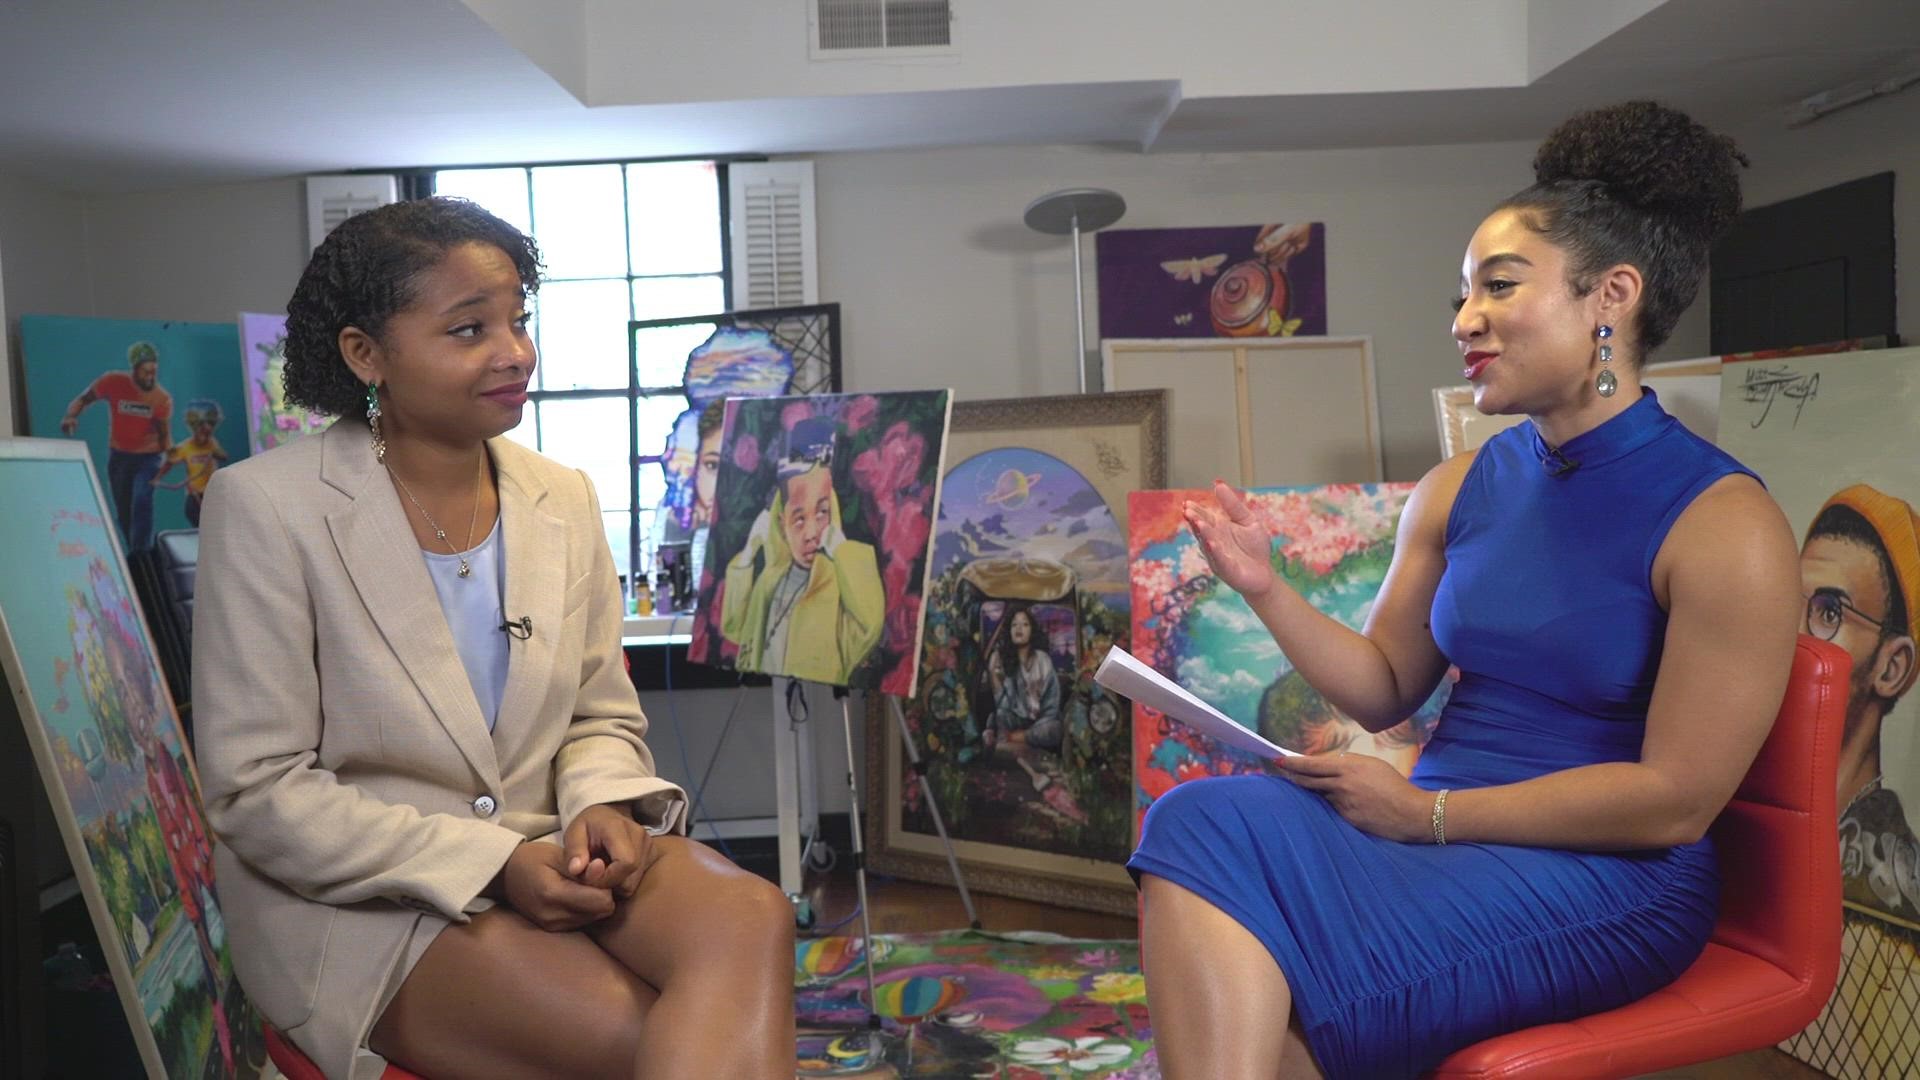 Ija Charles tells News 19 she is inspired by artists Blue Sky and Andre 3000. Blue Sky is a local artist who calls himself the "grandfather of public art."